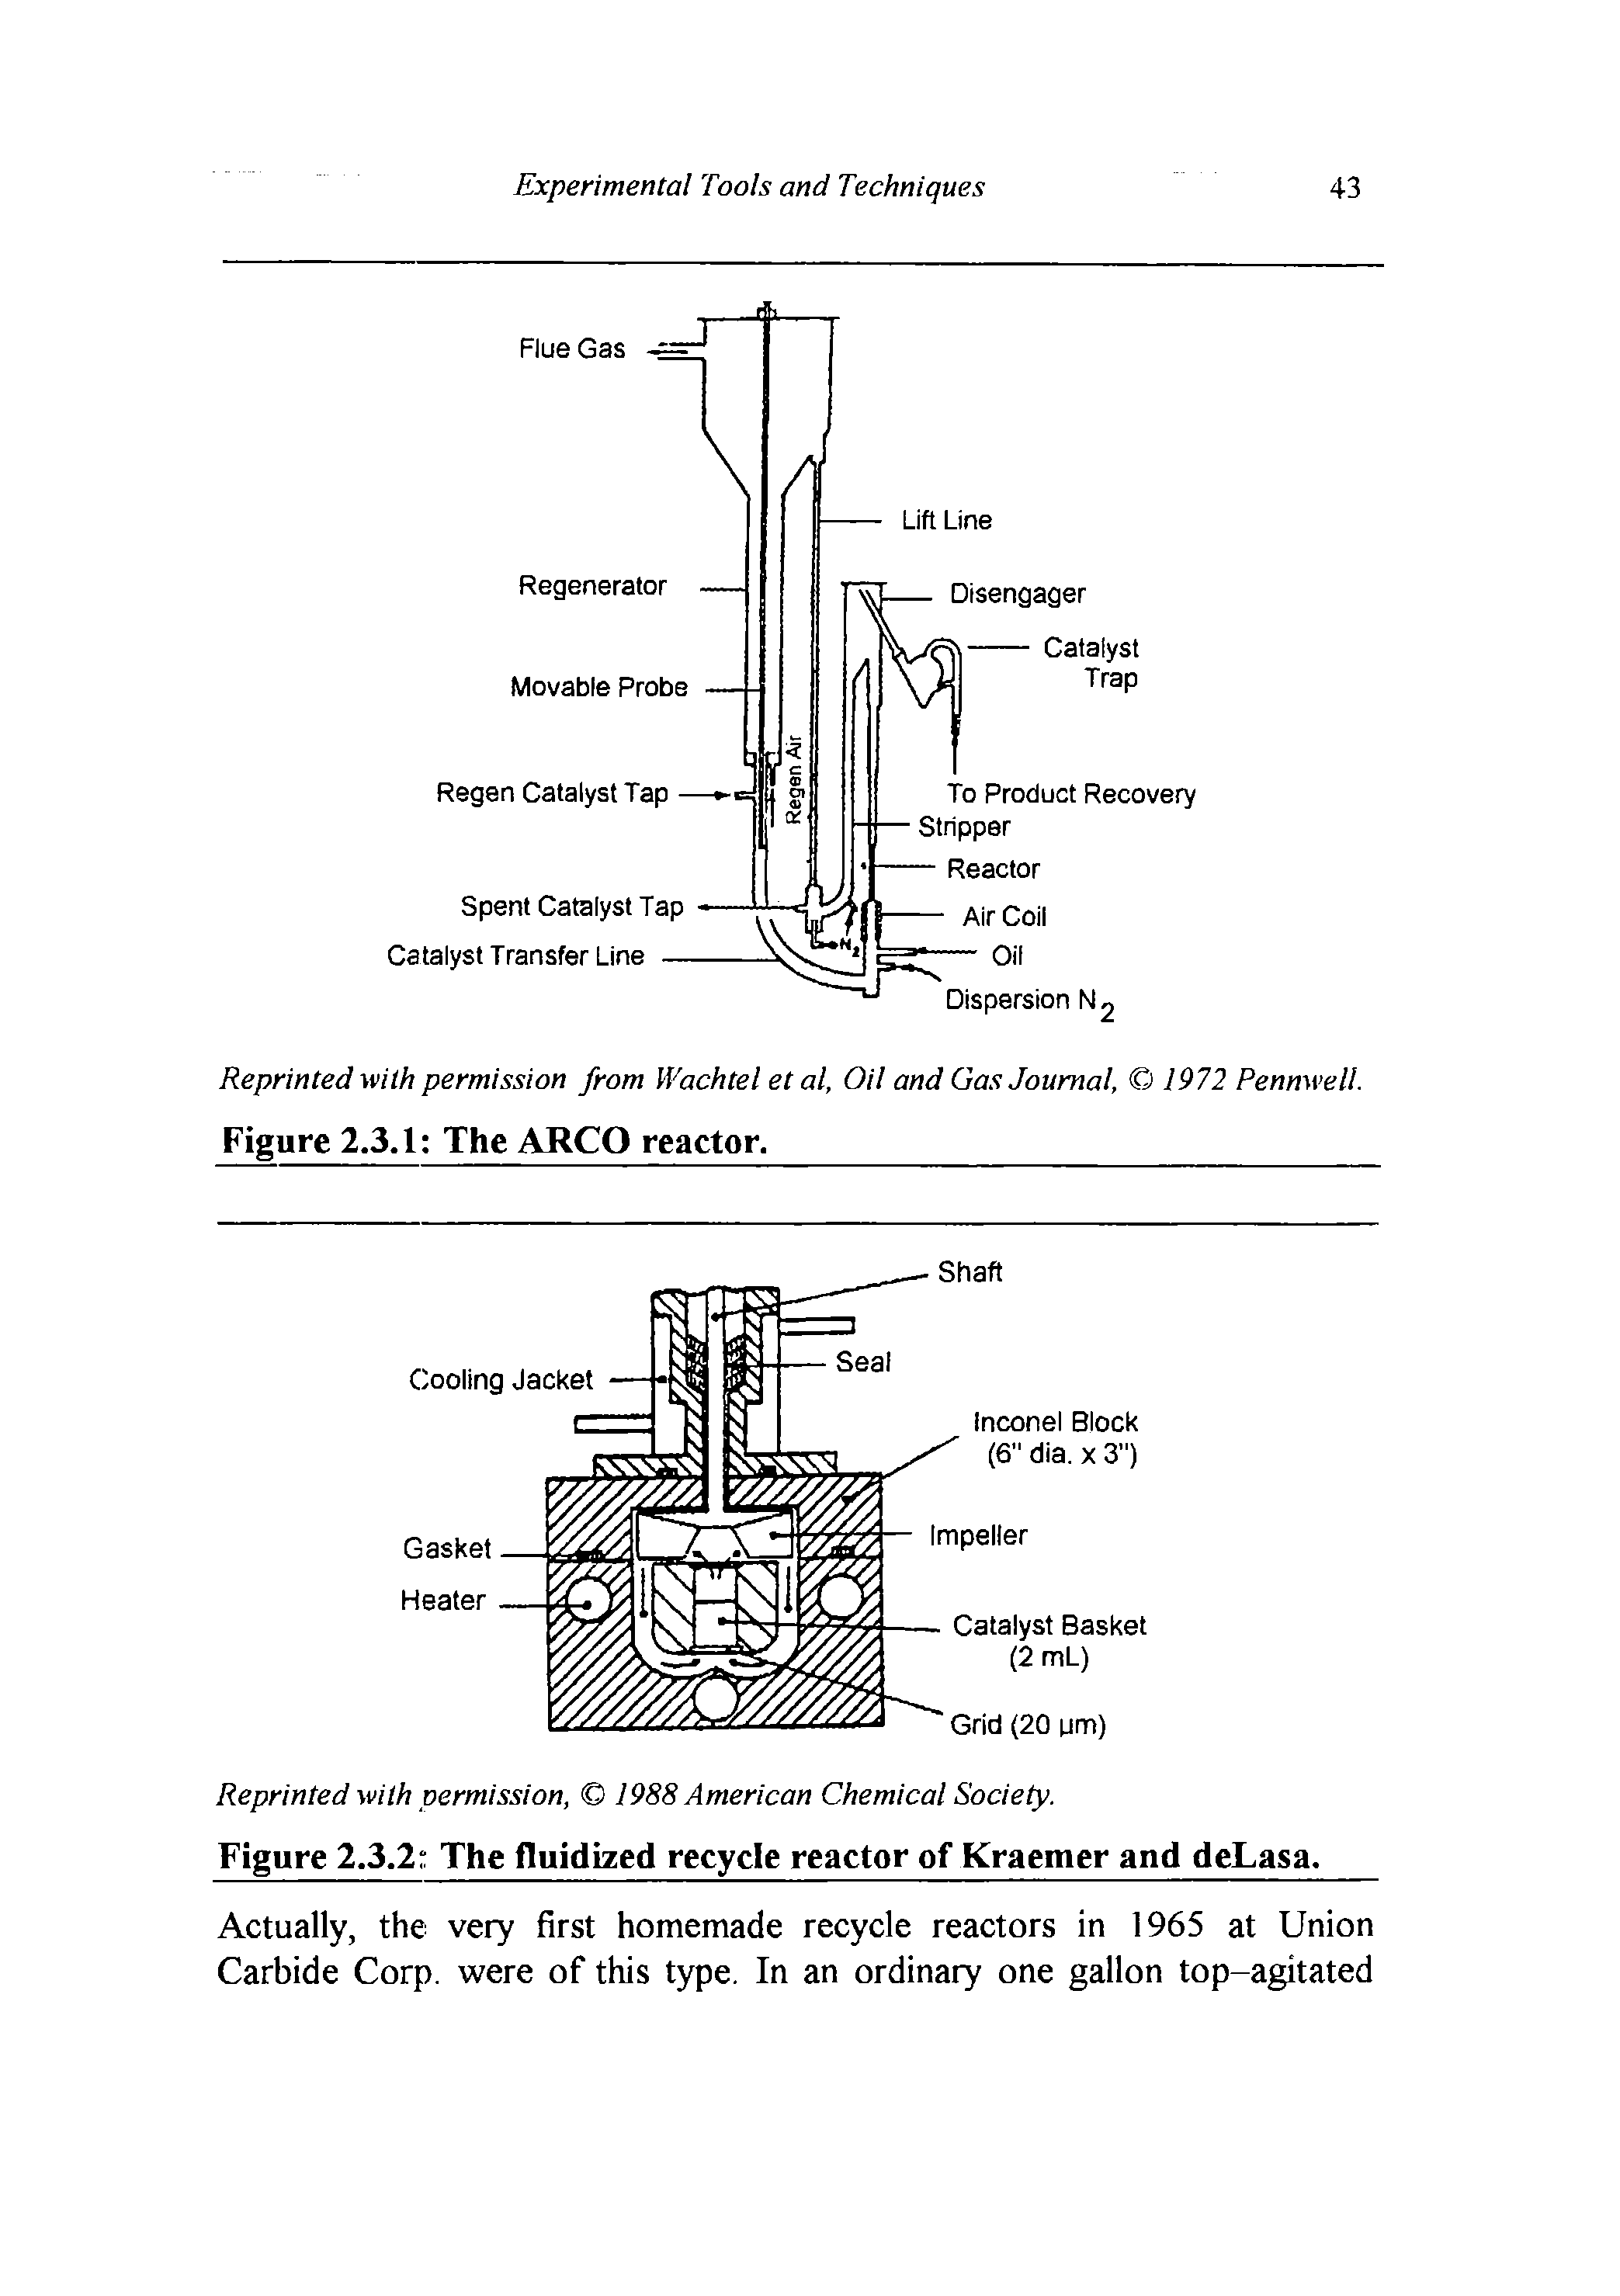 Figure 2.3.2 The fluidized recycle reactor of Kraemer and deLasa.